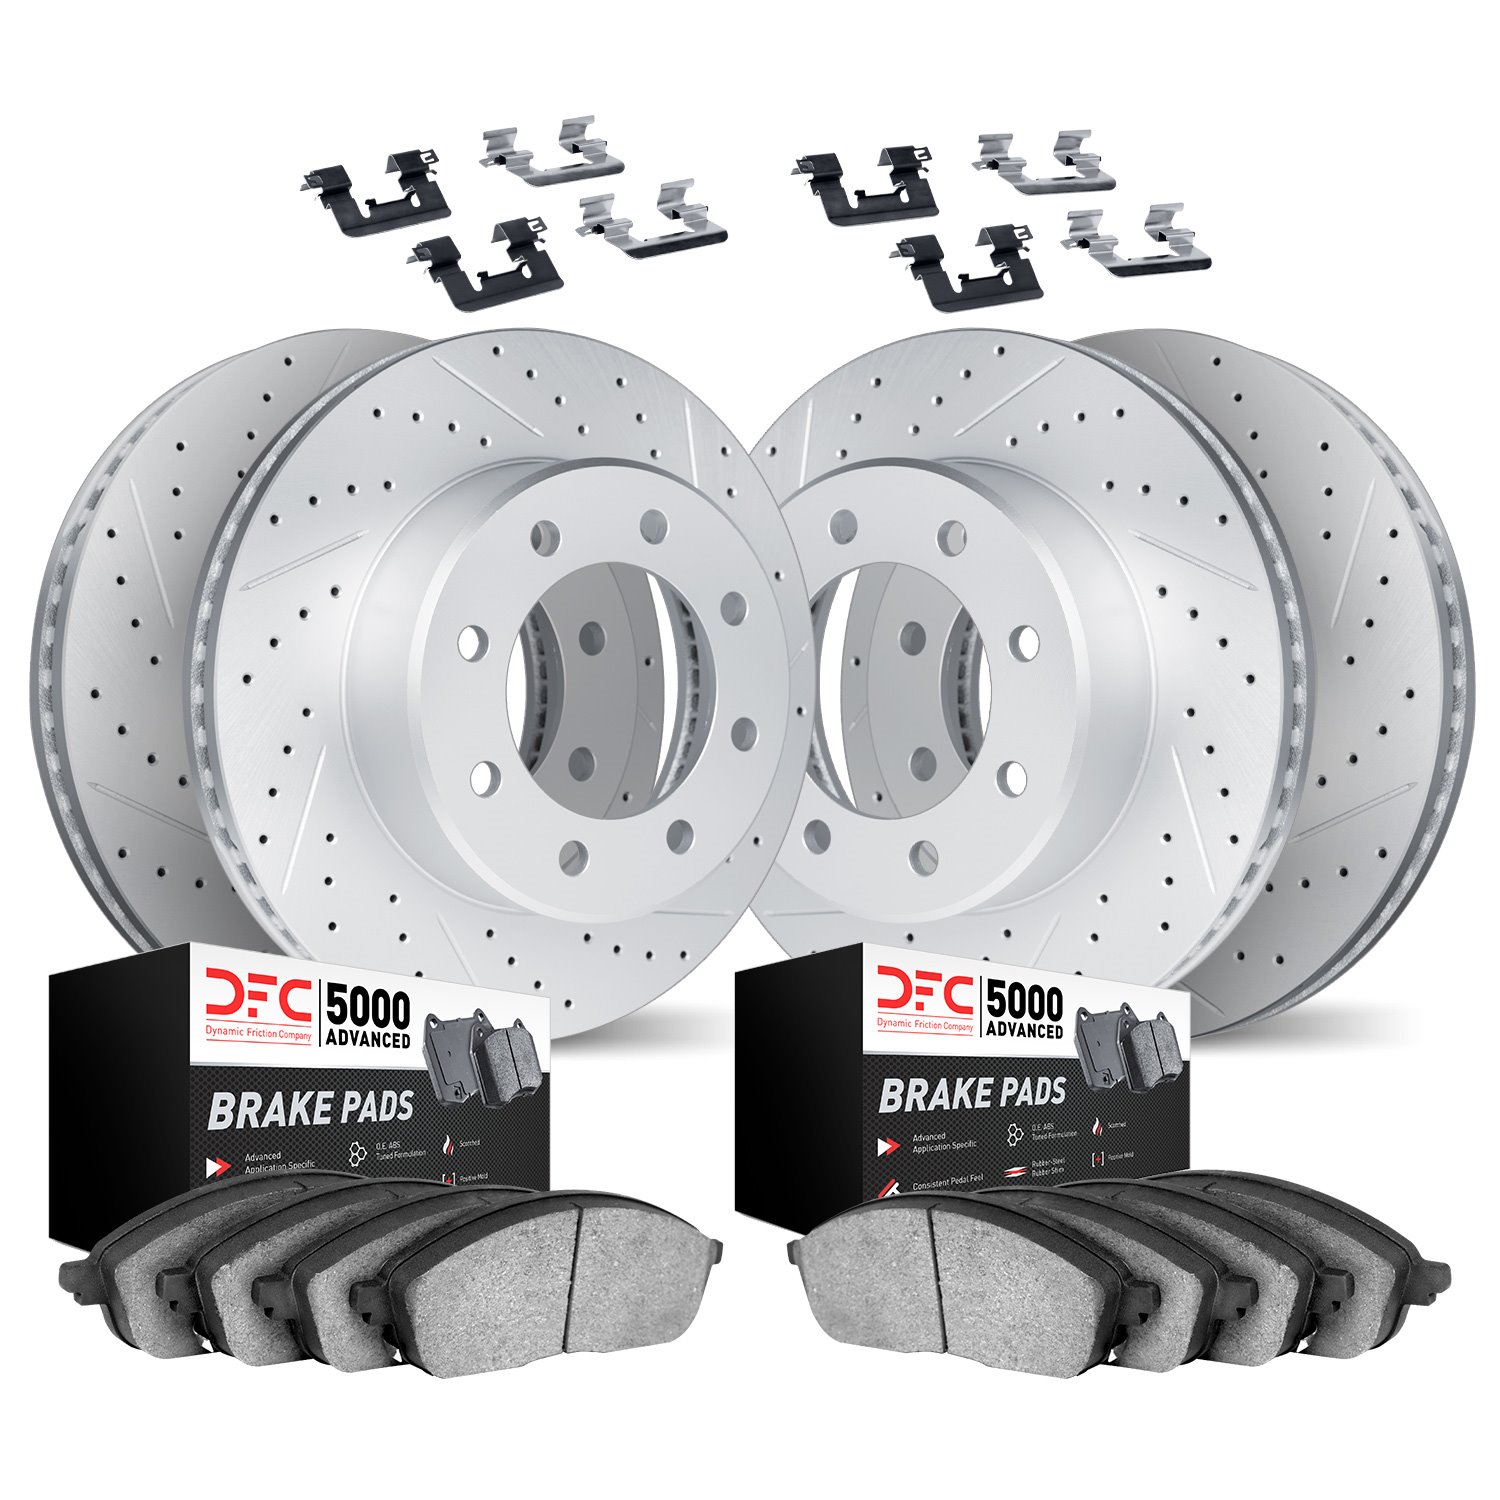 2514-48015 Geoperformance Drilled/Slotted Rotors w/5000 Advanced Brake Pads Kit & Hardware, 2001-2003 GM, Position: Front and Re